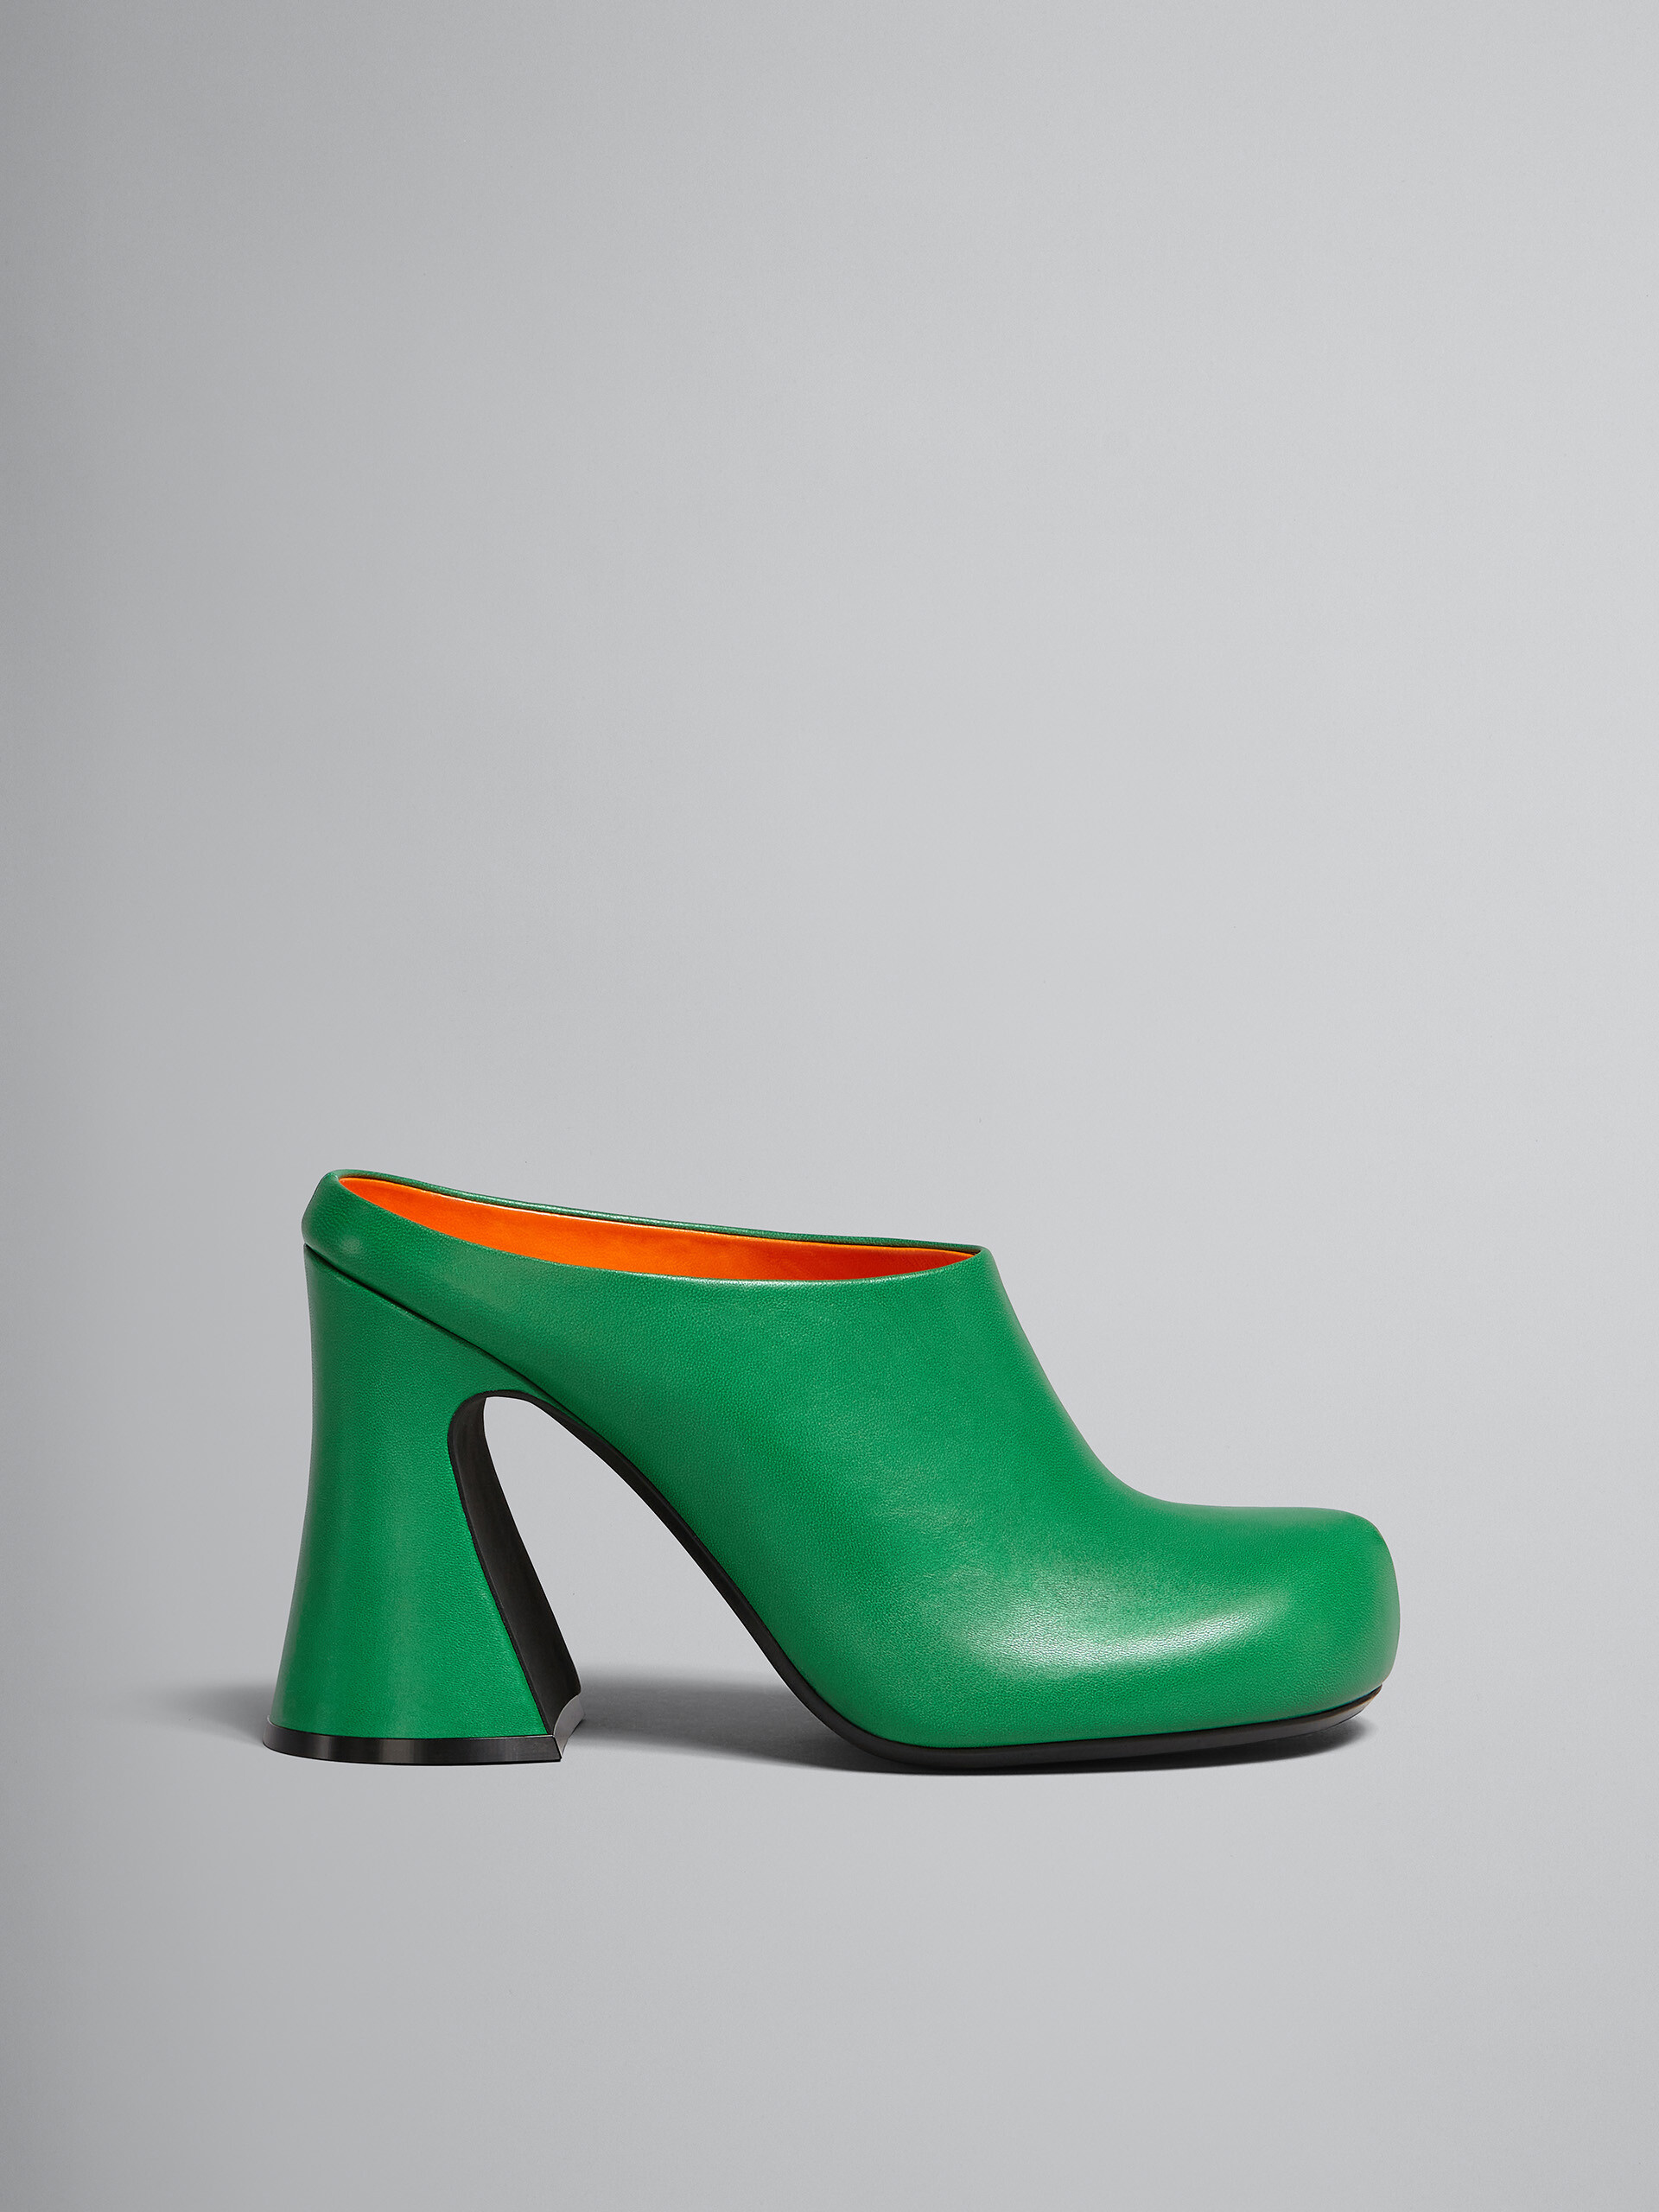 Green leather sabot - Clogs - Image 1